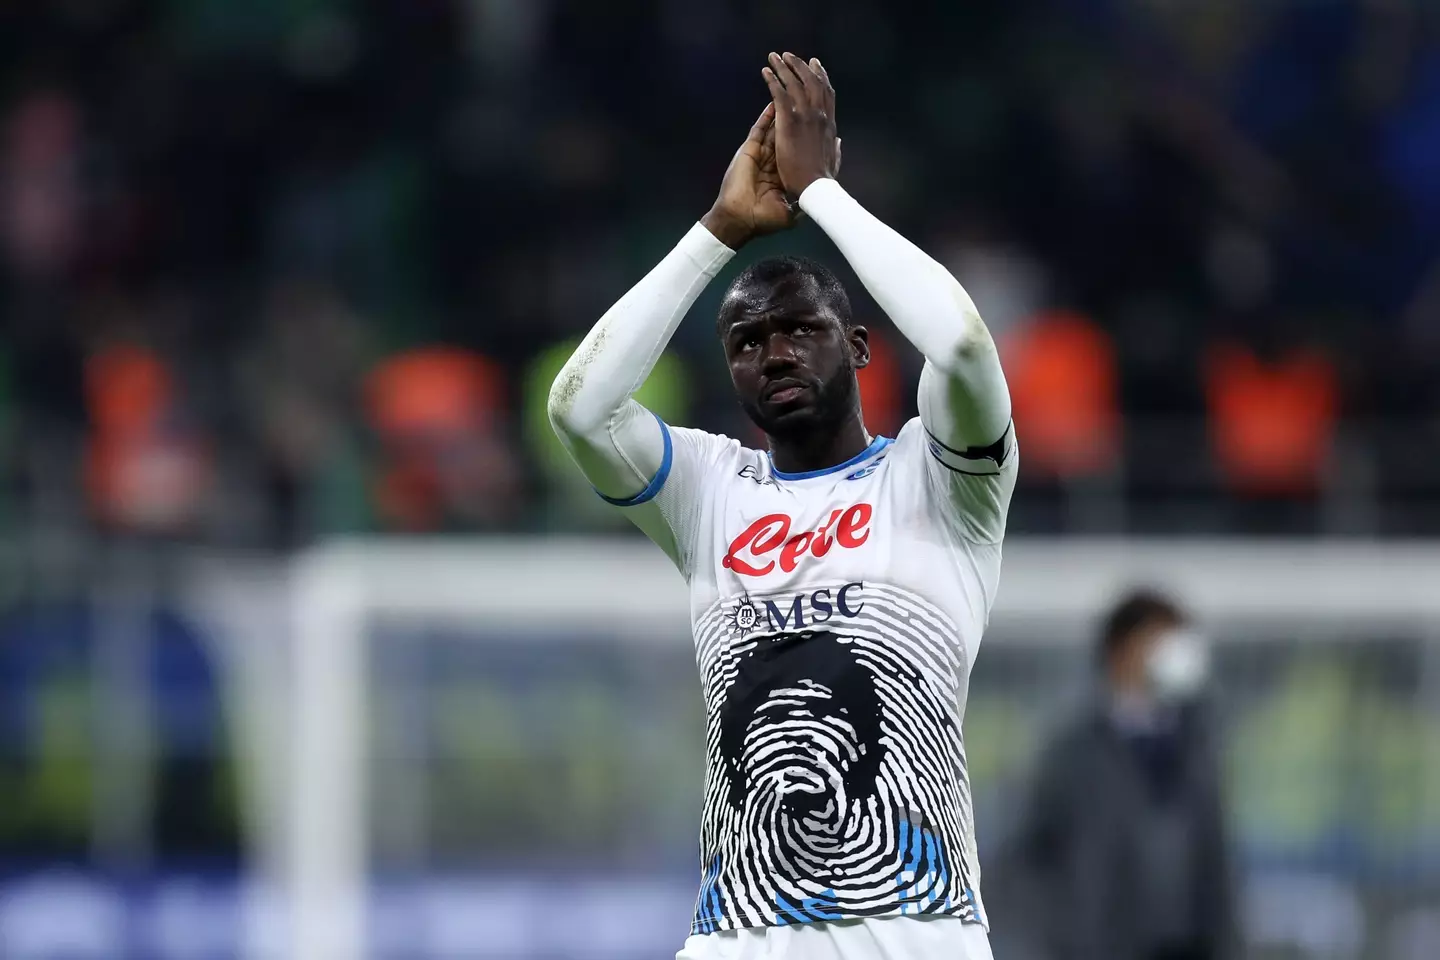 Kalidou Koulibaly of Napoli gestures during a Serie A match. (Alamy)